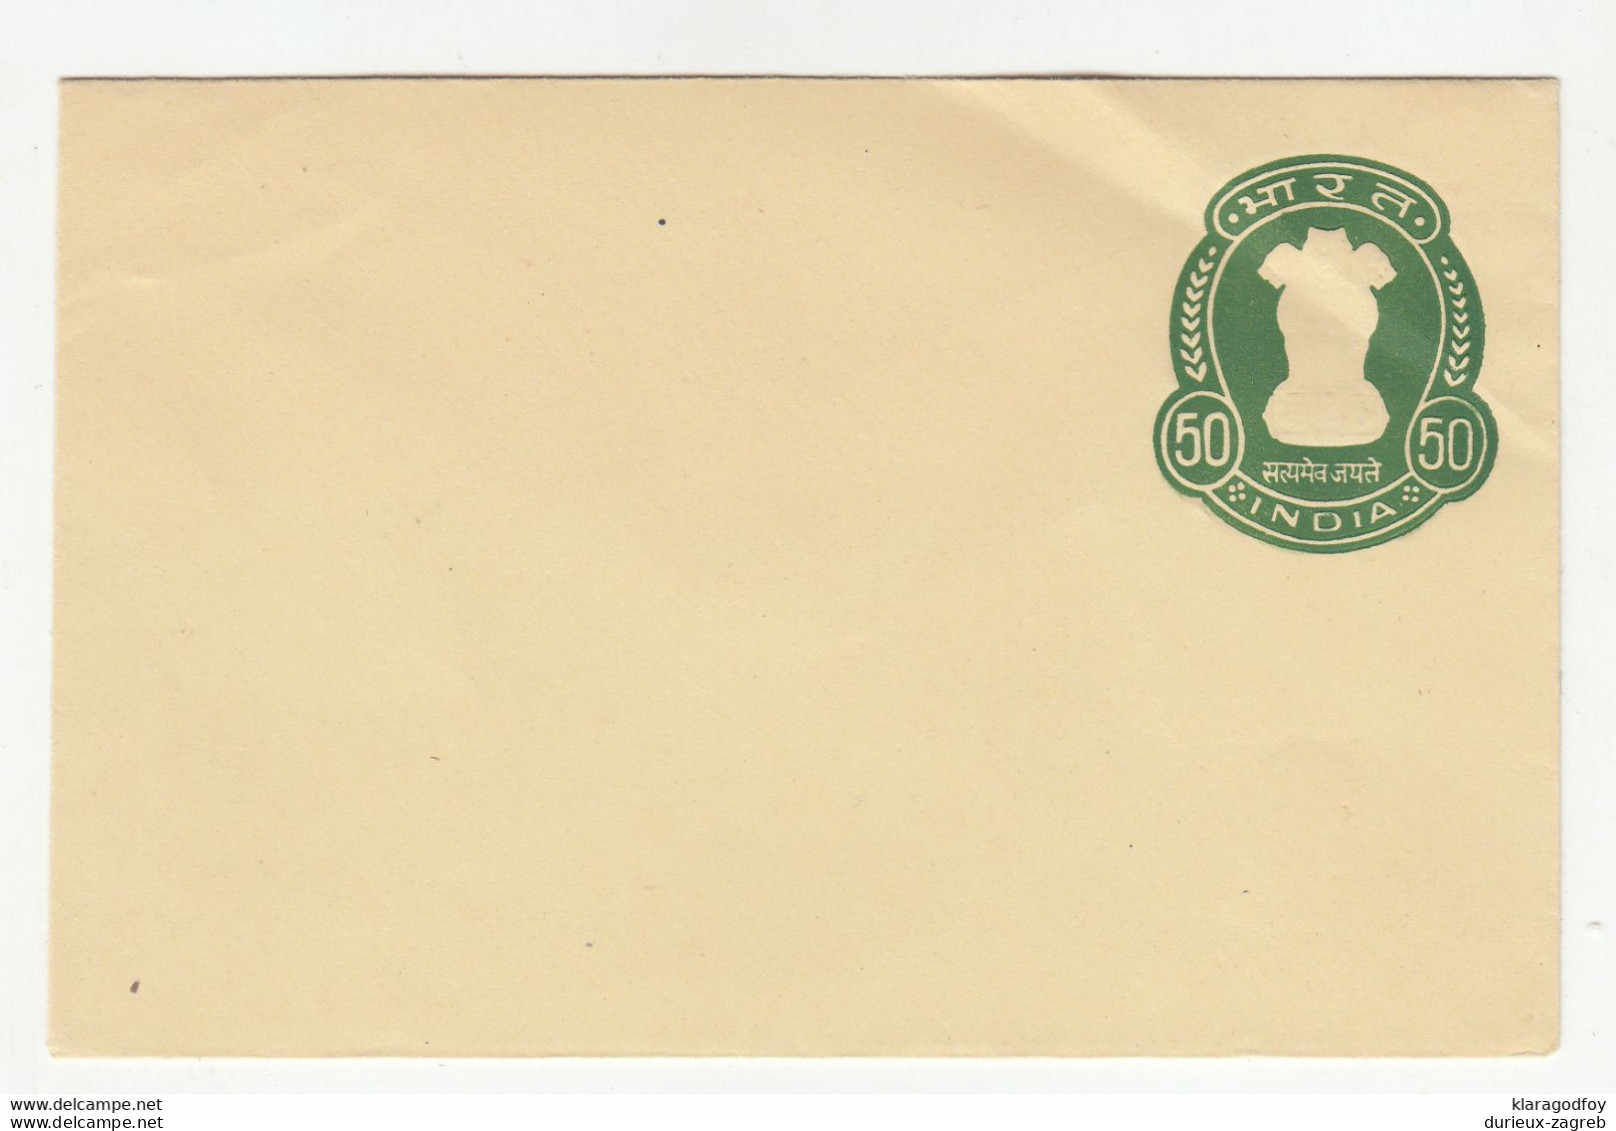 India Postal Stationery Letter Cover Unused B210710 - Covers